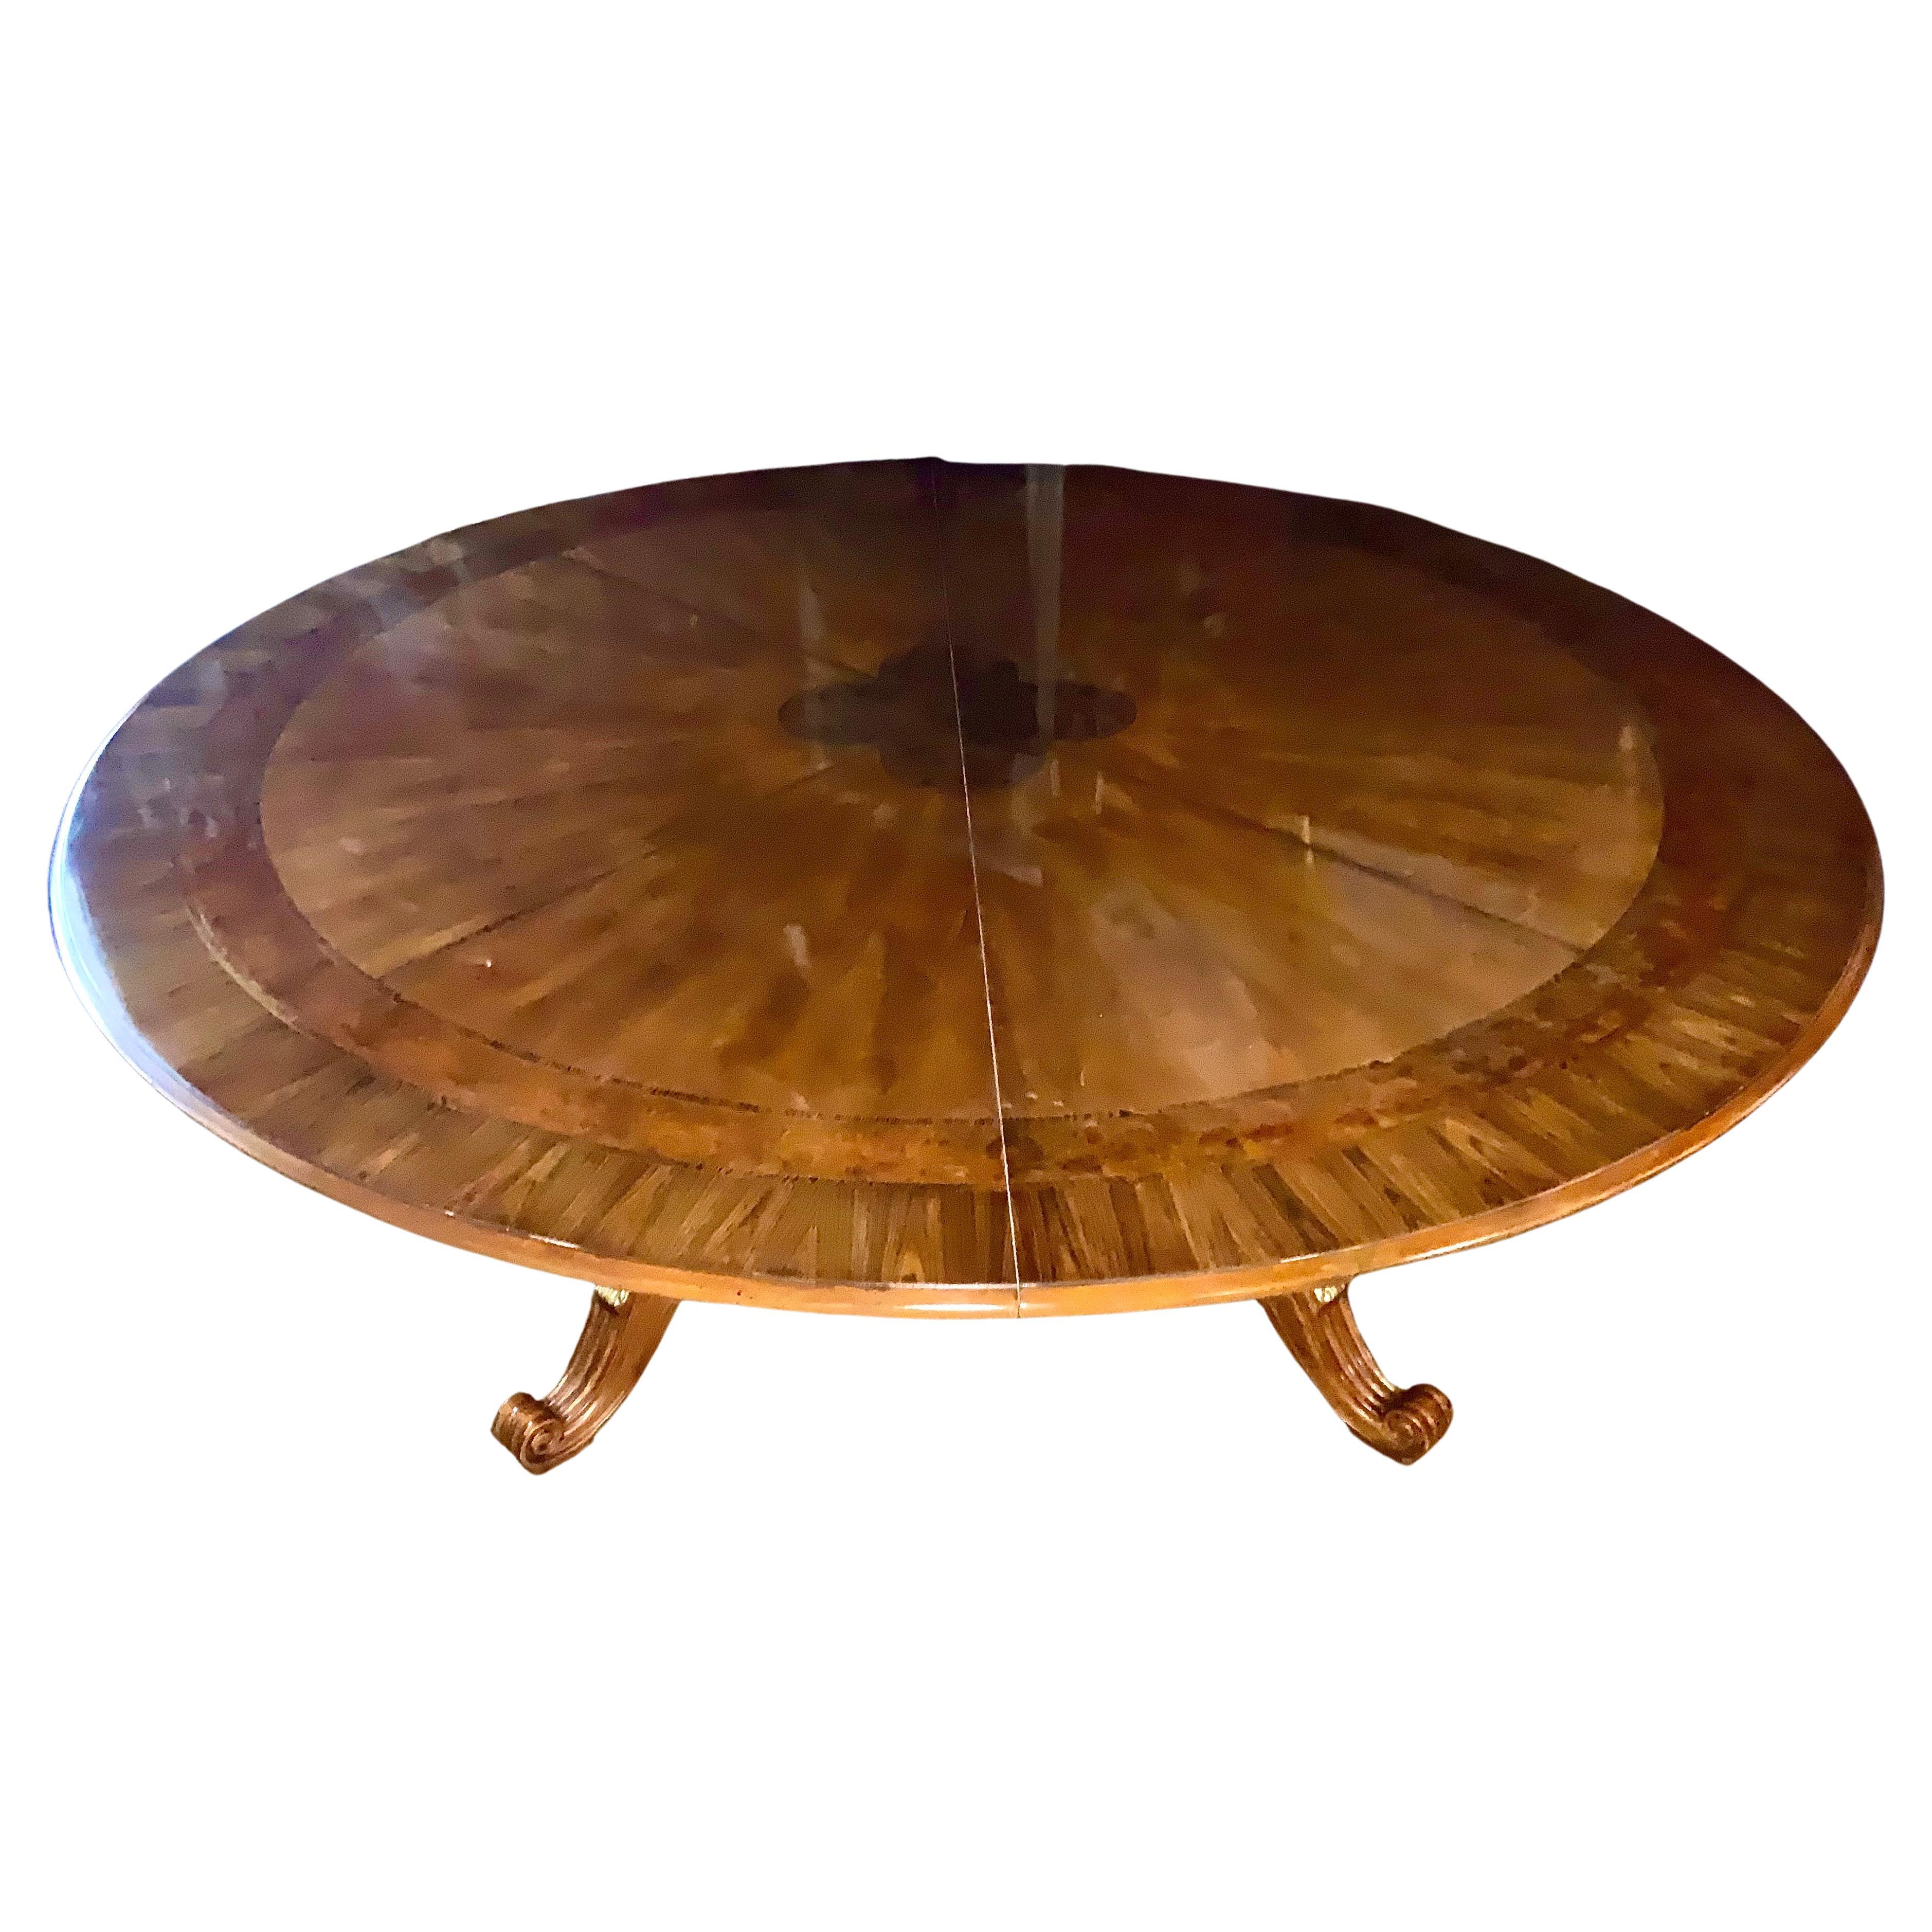 Large Round Dining Table in Neoclassical Style with Inlay, Walnut